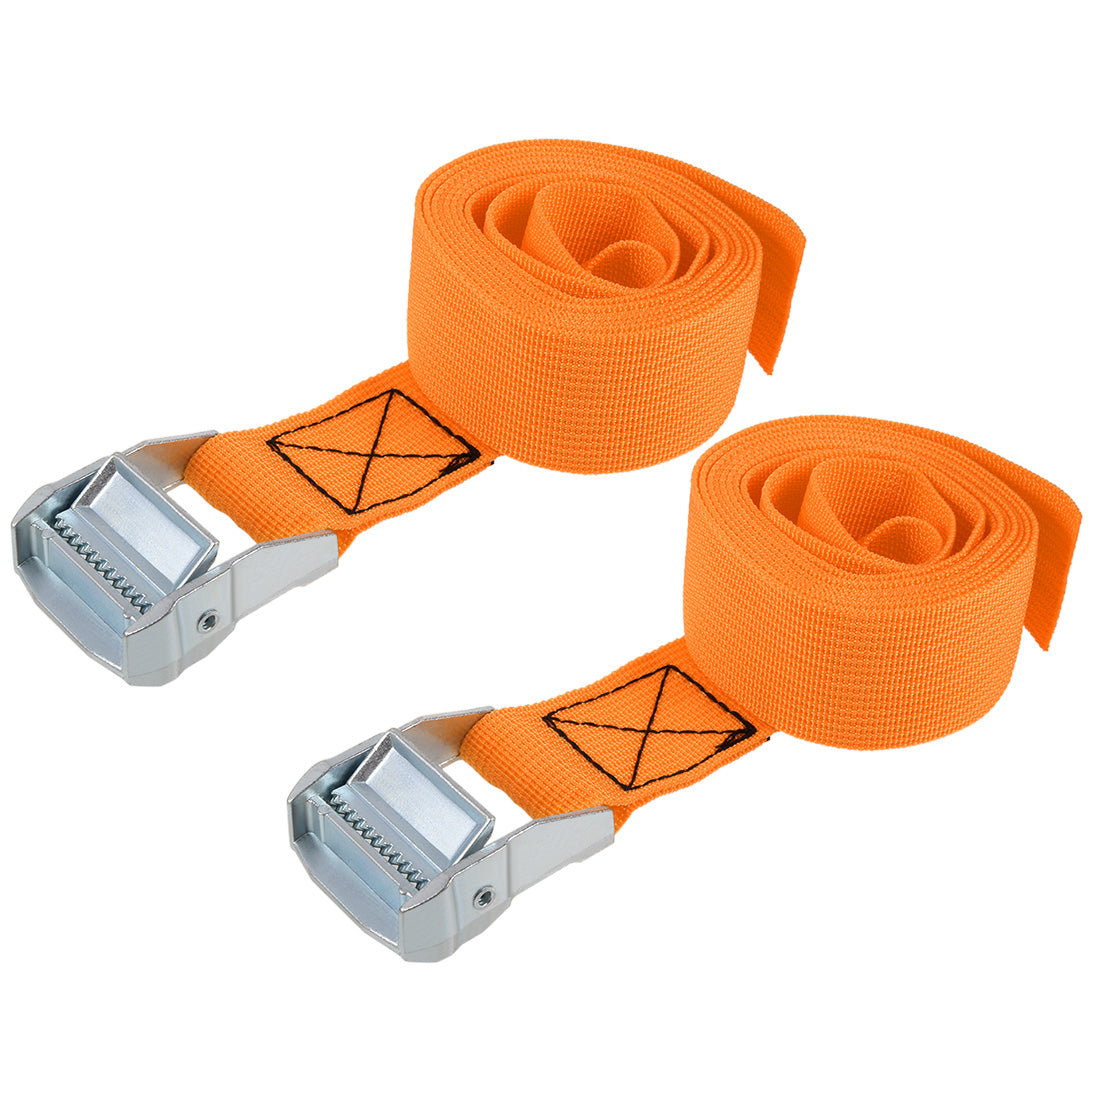 uxcell Uxcell Lashing Strap 1.5" x 6.5' Cargo Tie Down Straps with Cam Lock Buckle Up to 1100lbs Orange 2Pcs